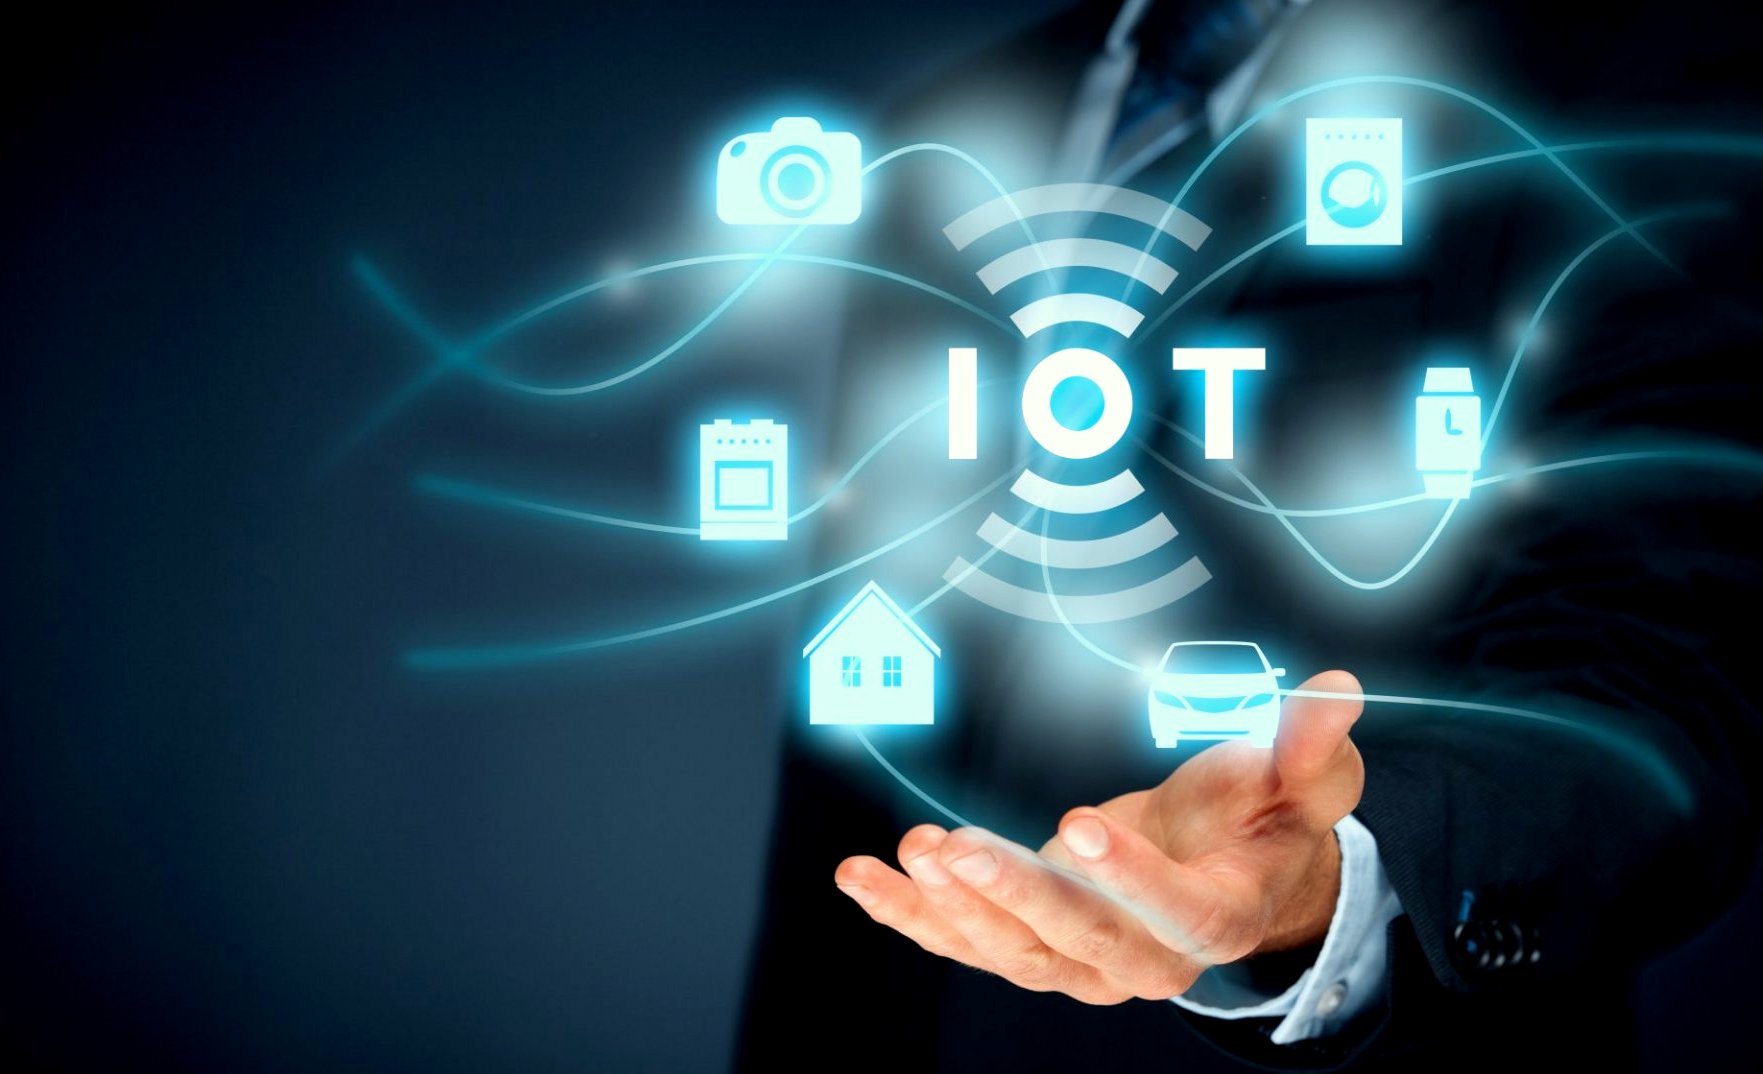 IoT Training with The Core Systems in Chandigarh iot training with the core systems in chandigarh IoT Training with The Core Systems in Chandigarh IoT Training with The Core Systems in Chandigarh 1